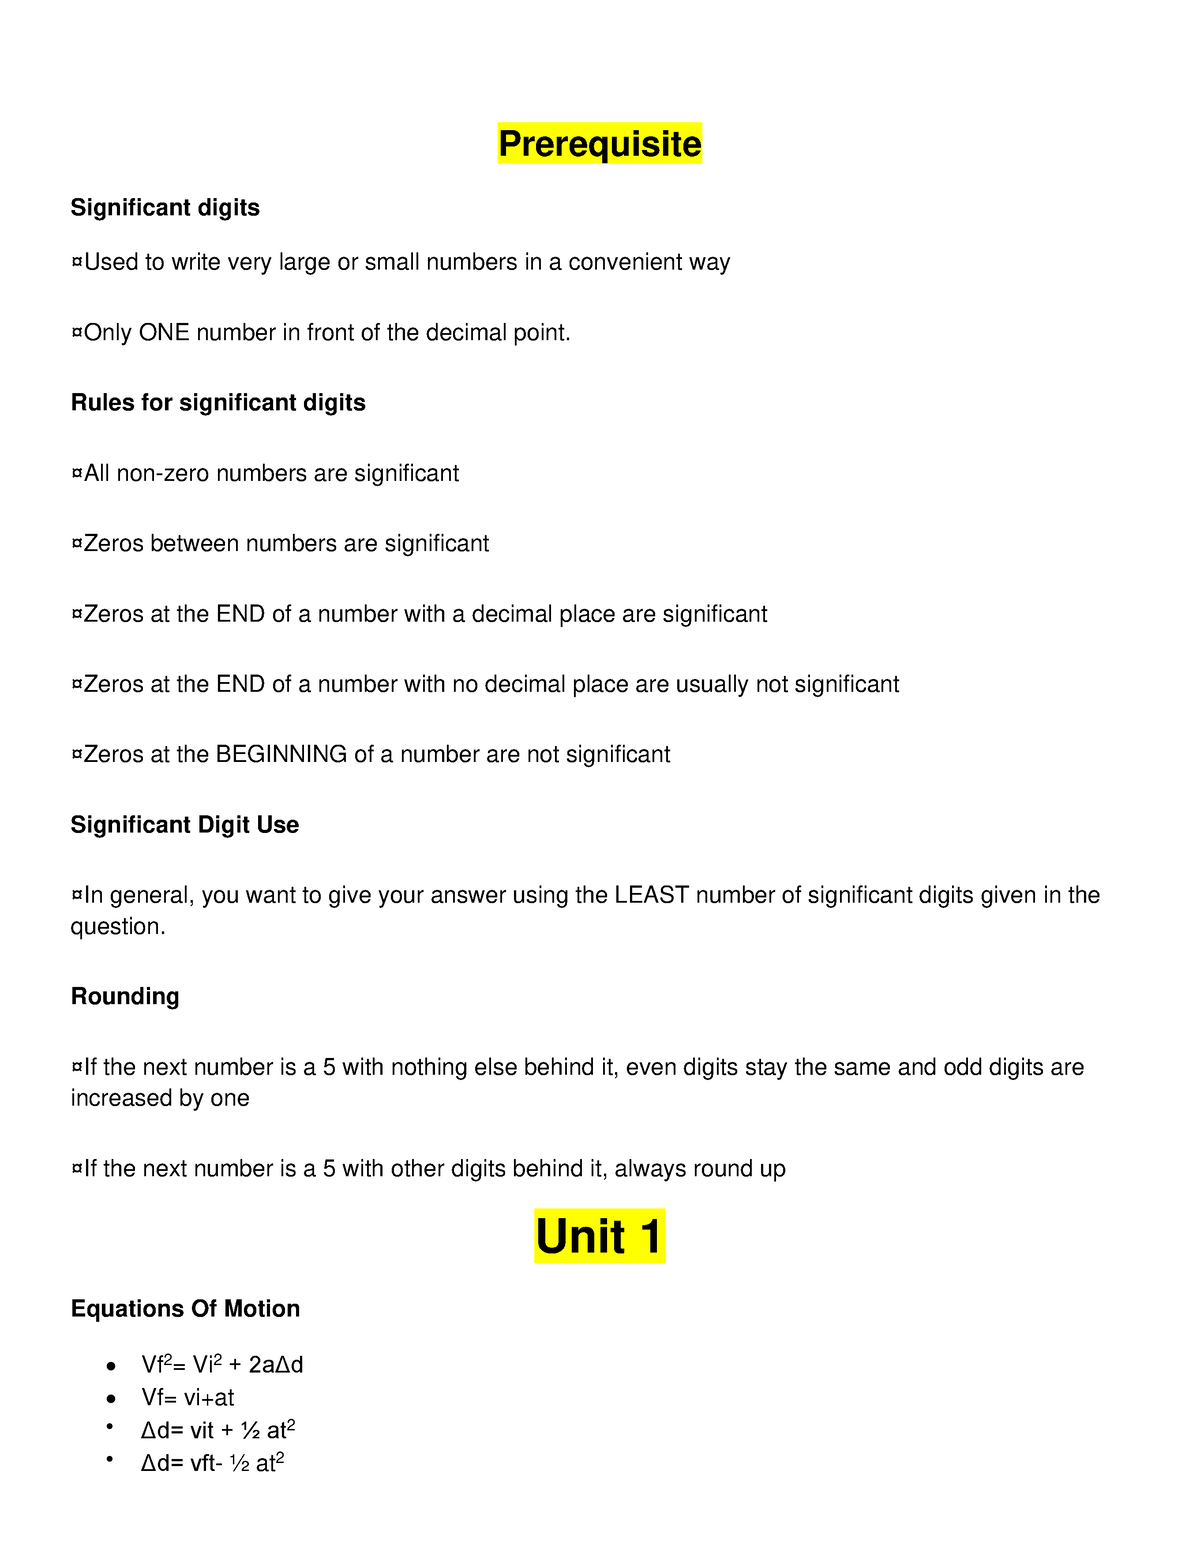 sph4u-unit-1-summary-prerequisite-significant-digits-used-to-write